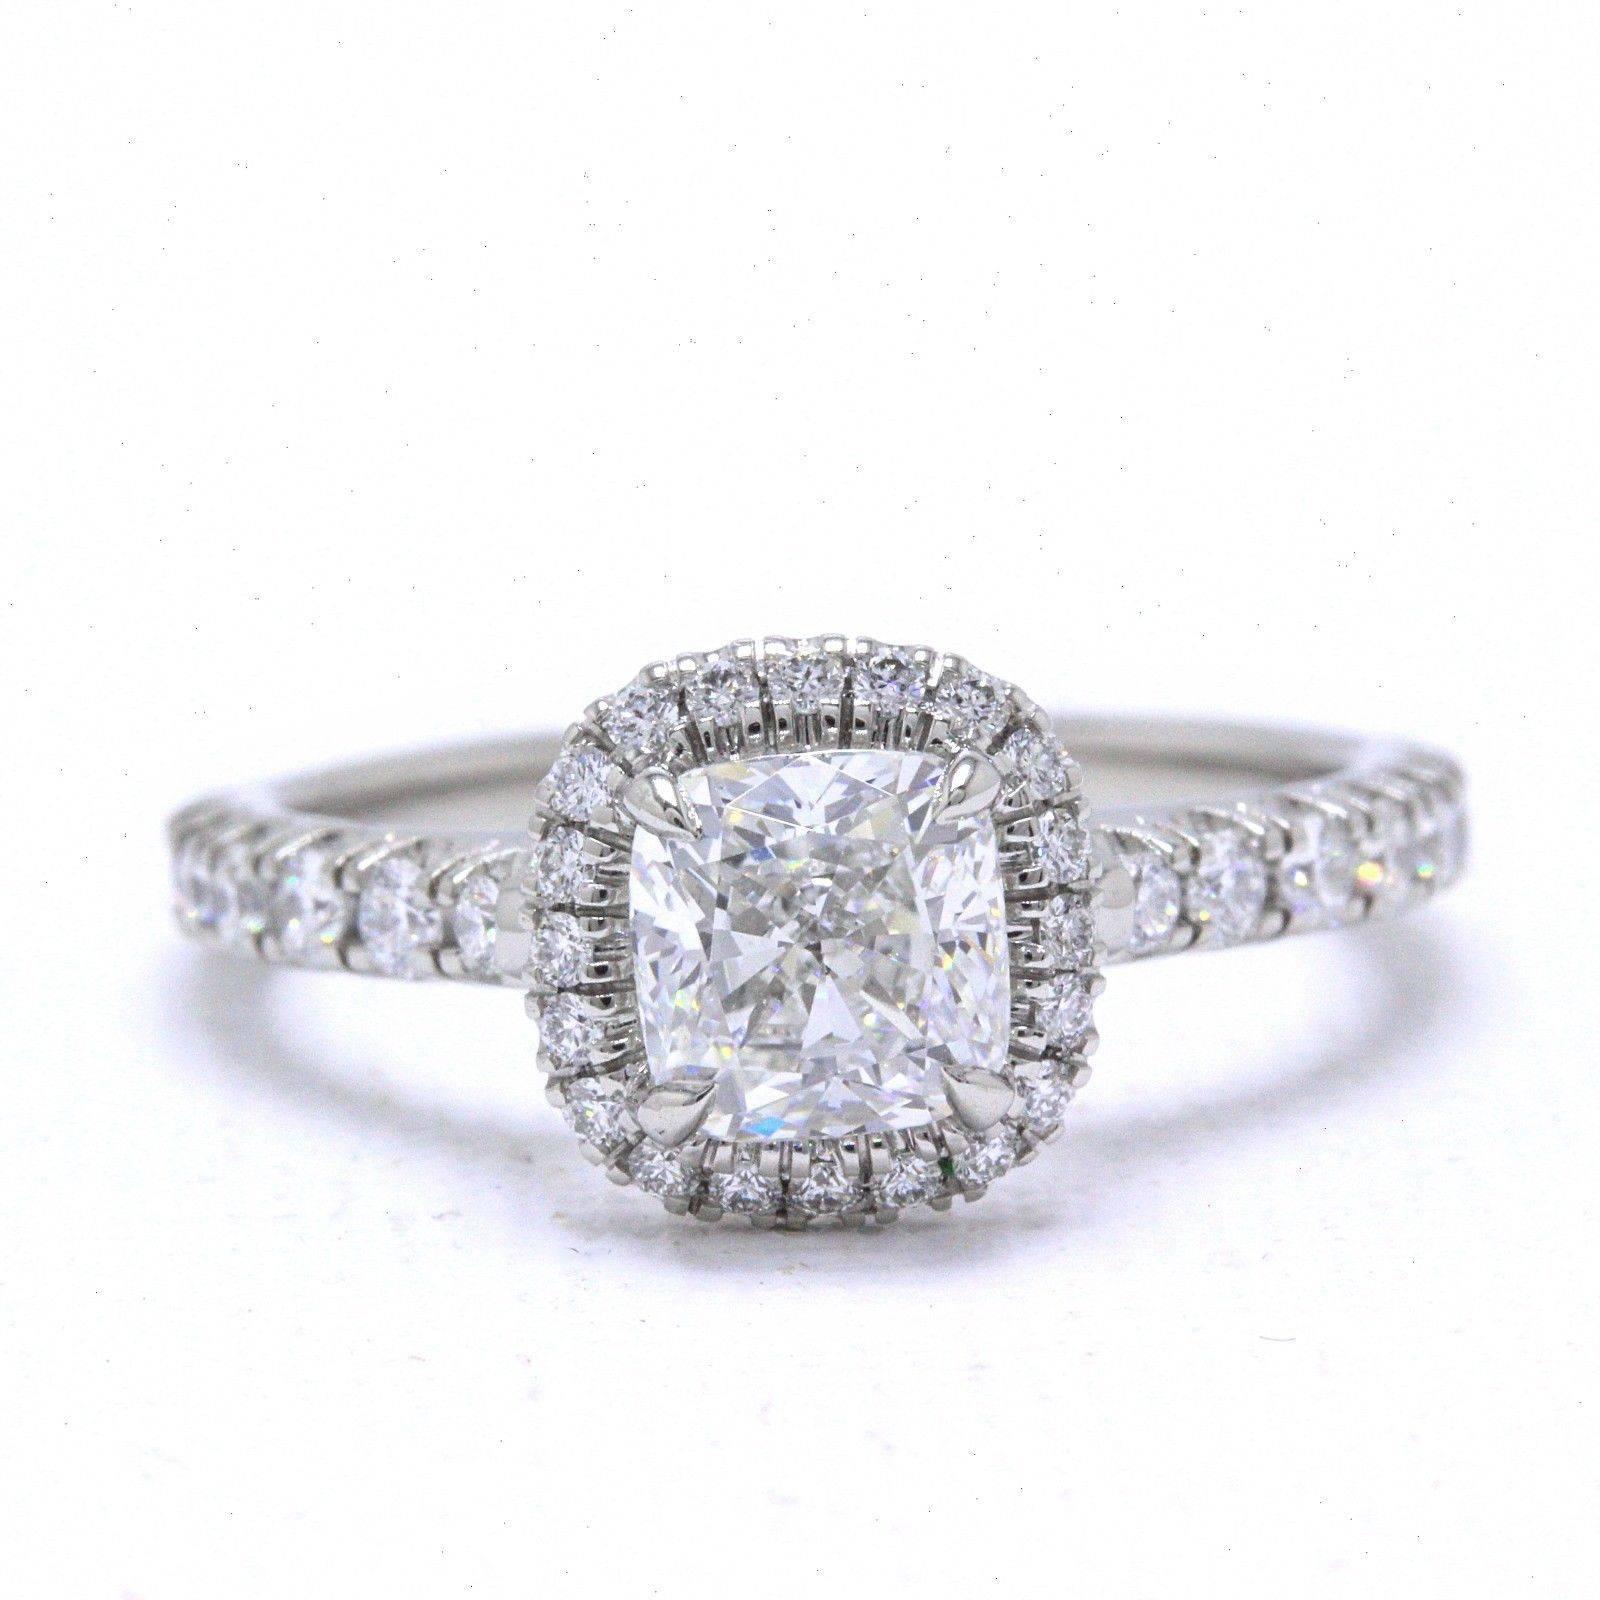 CARTIER DESTINEE DIAMOND ENGAGEMENT RING

Style:  HALO

Serial Number:  DLXXXX CRNXXXXX

Certification:  GIA 6157849481

Metal:  Platinum PT950

Size:  6.25 - SIZABLE

Total Carat Weight:  1.59 TCW

Diamond Shape:  Cushion Modified Brilliant  1.03